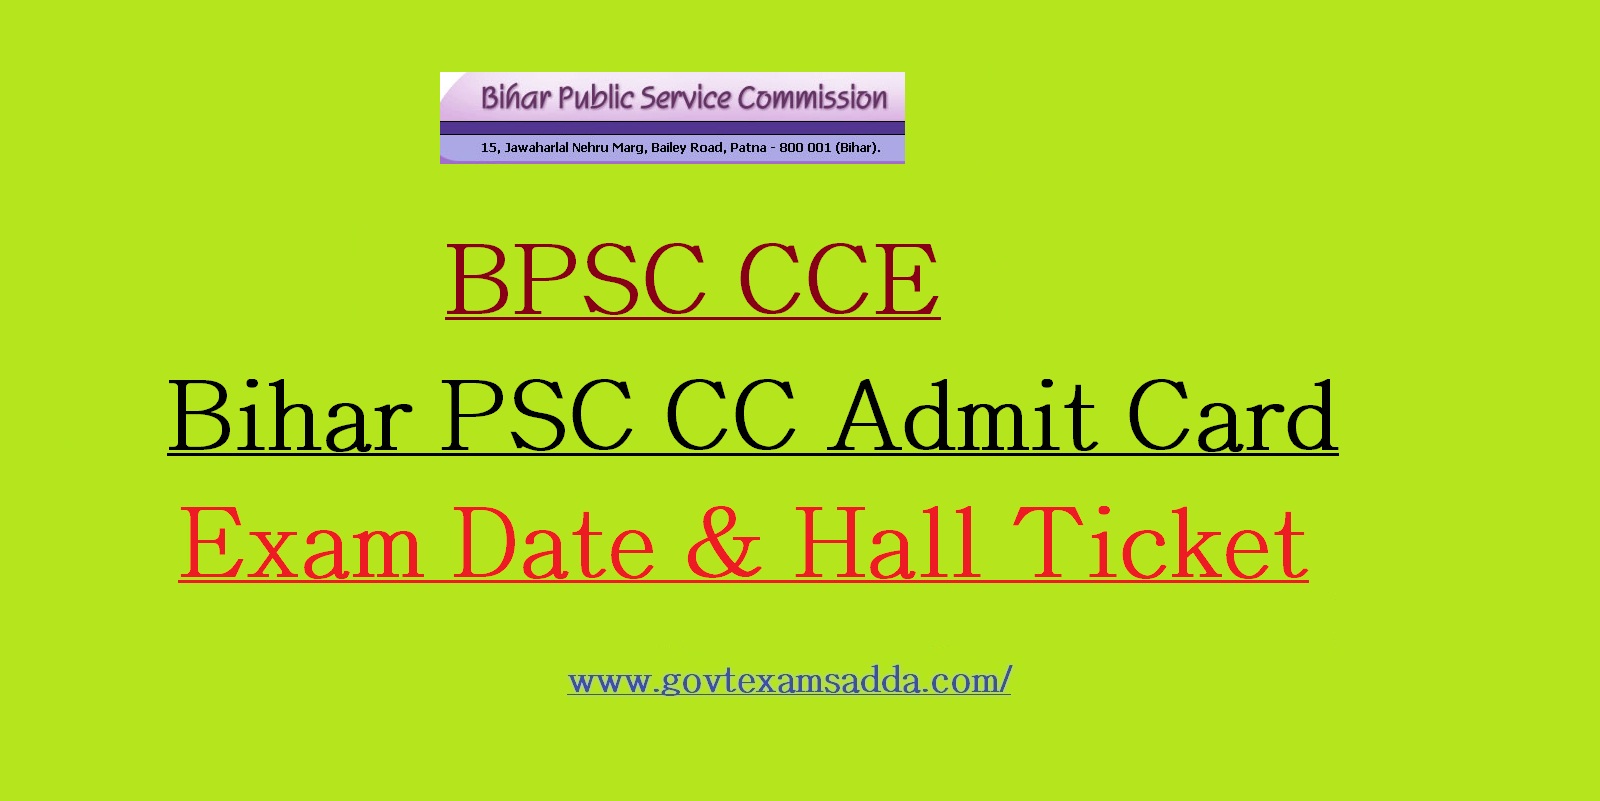 BPSC CCE Admit Card 2022